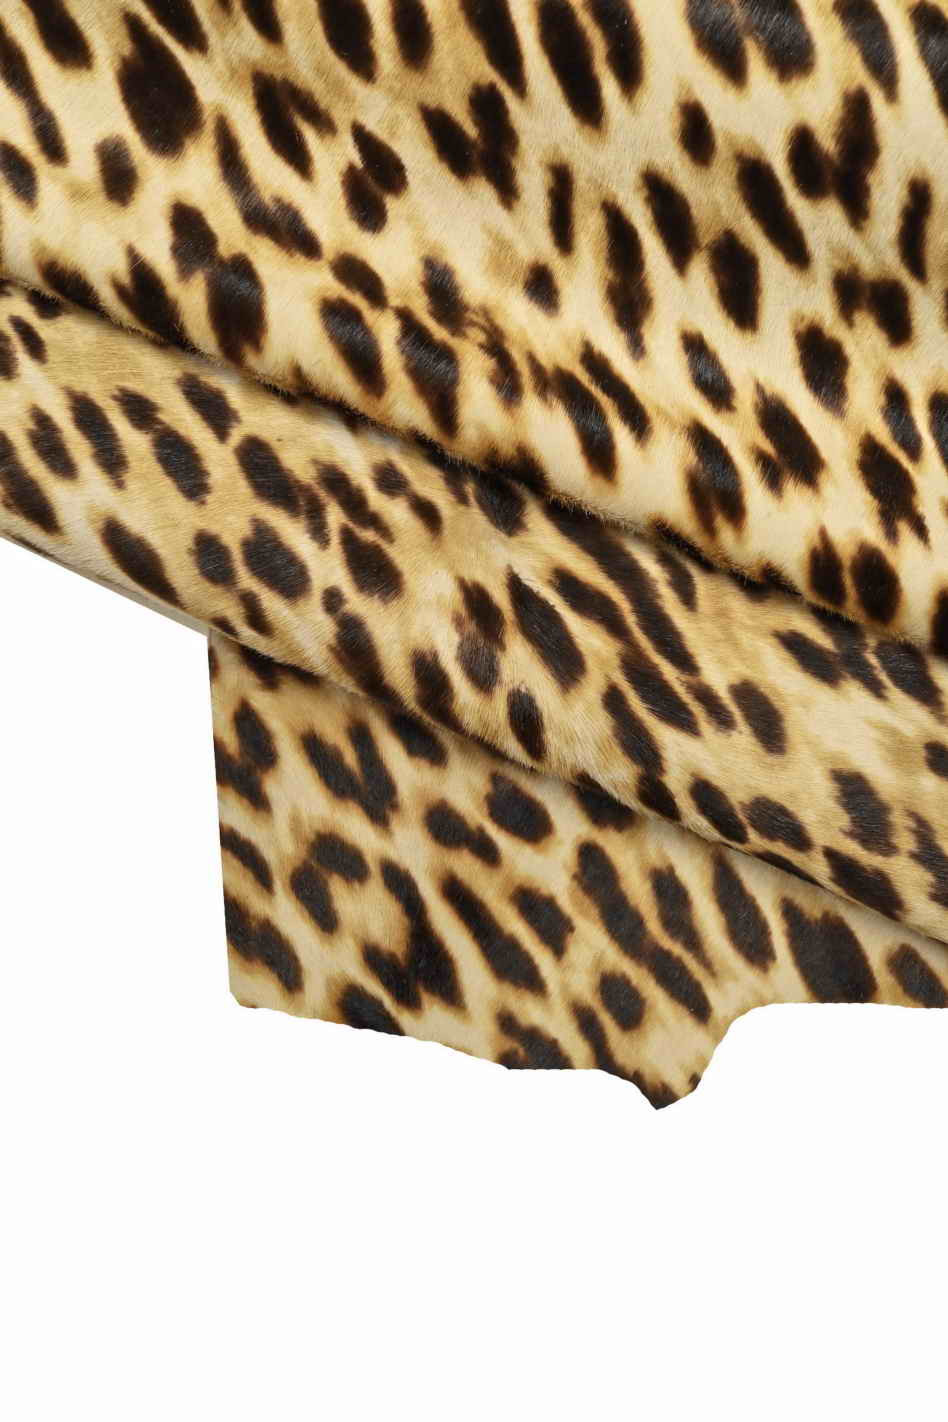 LEOPARD HAIR on leather hide, textured pony calfskin with zebra print ...